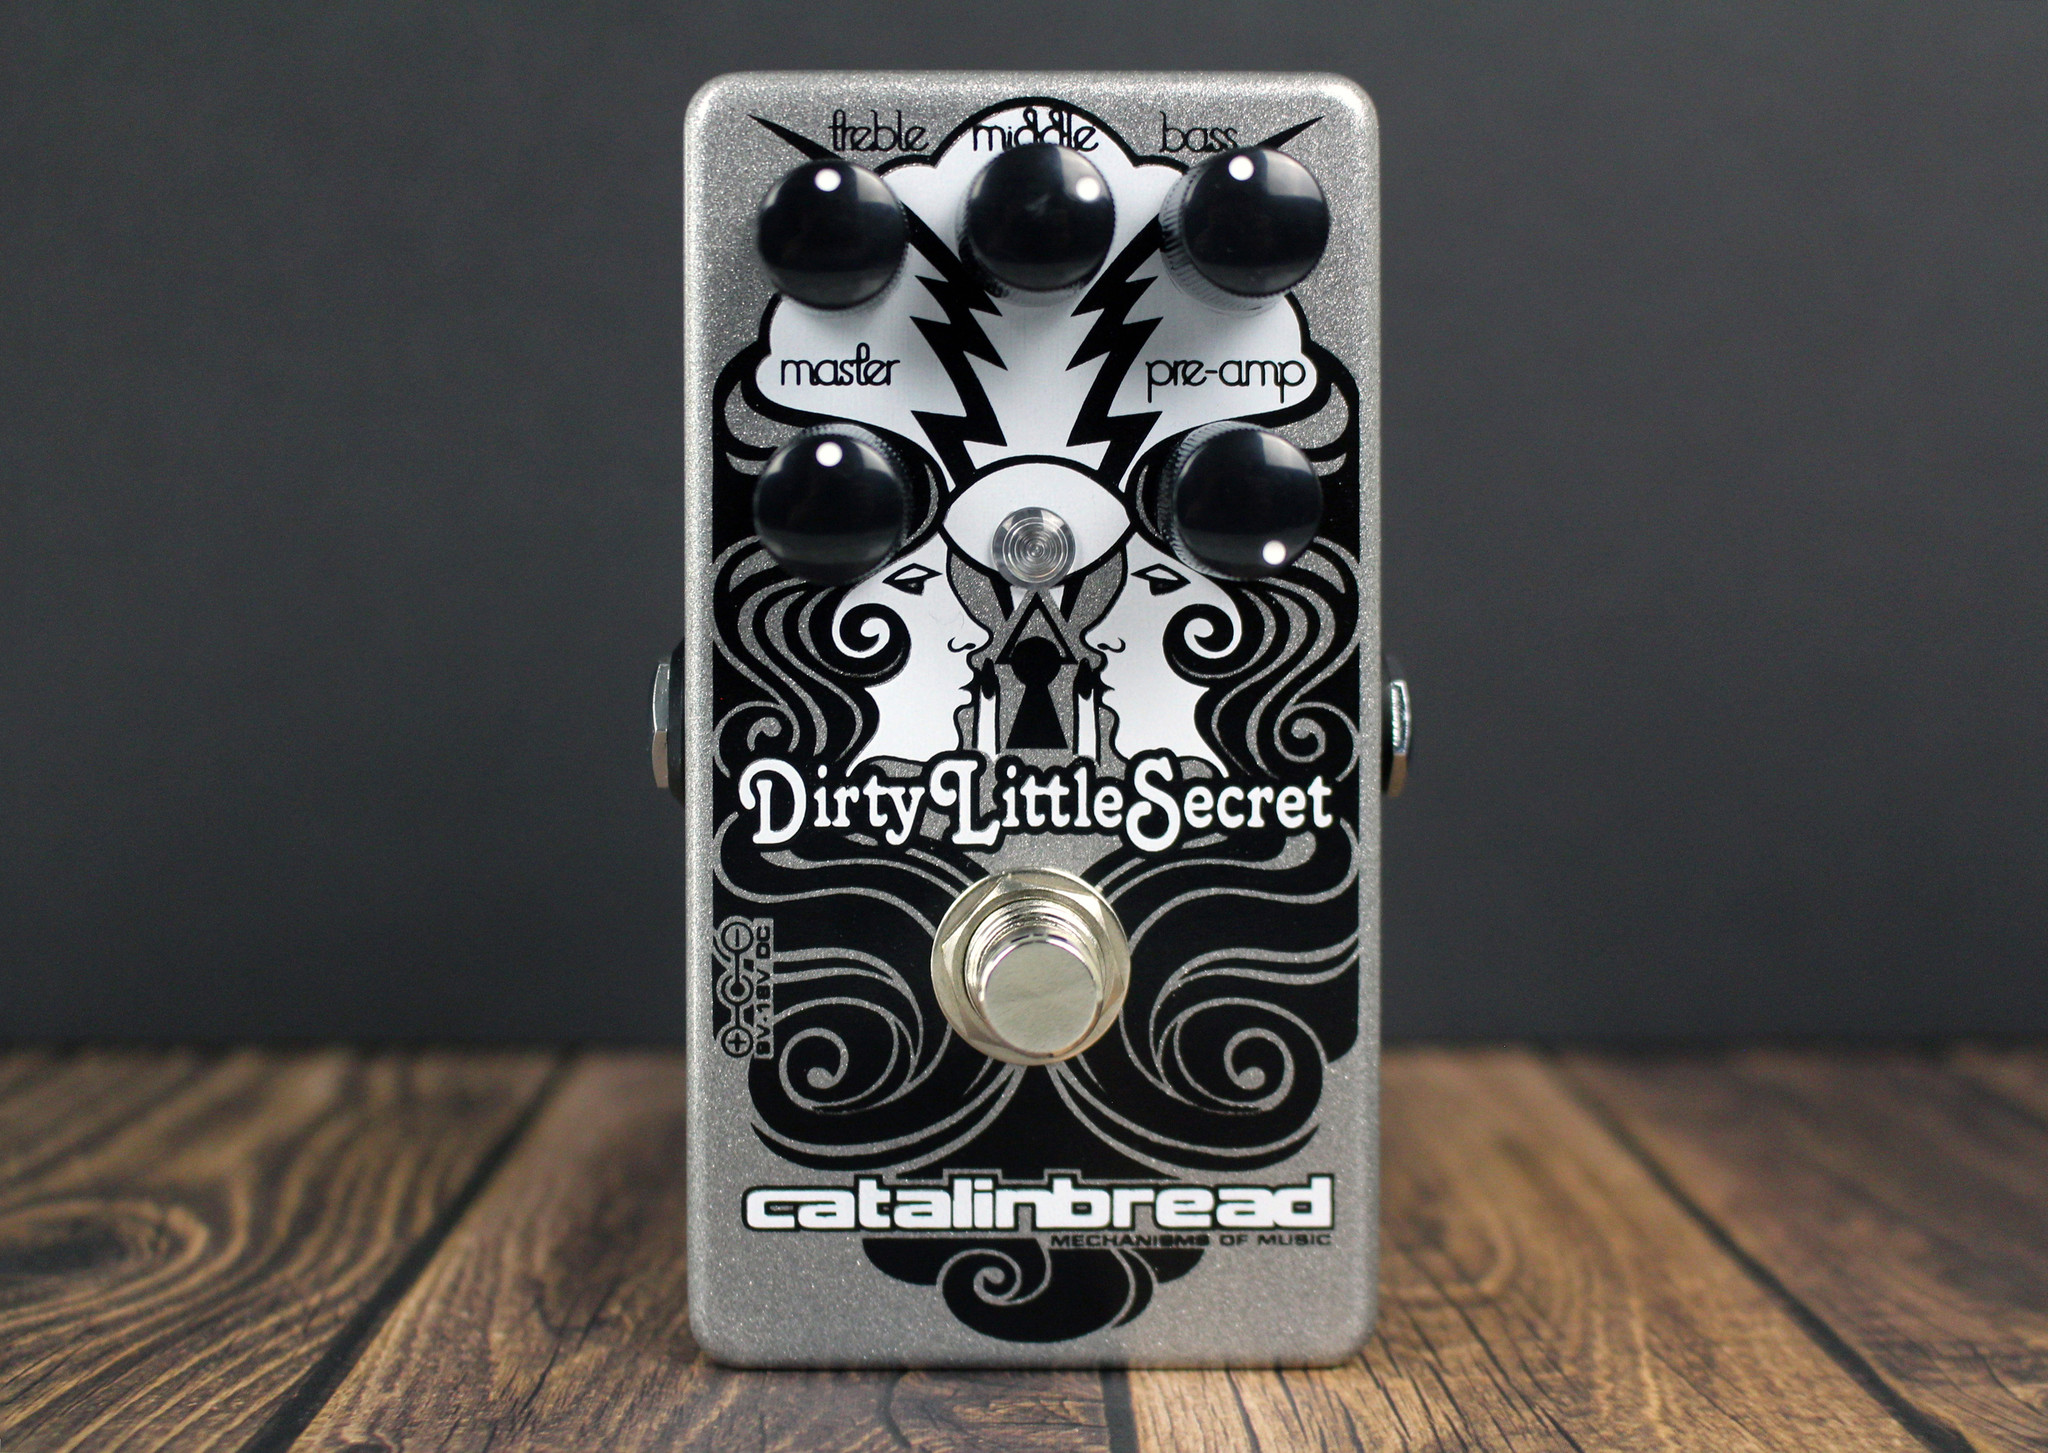 Catalinbread Dirty Little Secret MKIII ("Marshall in a Box")